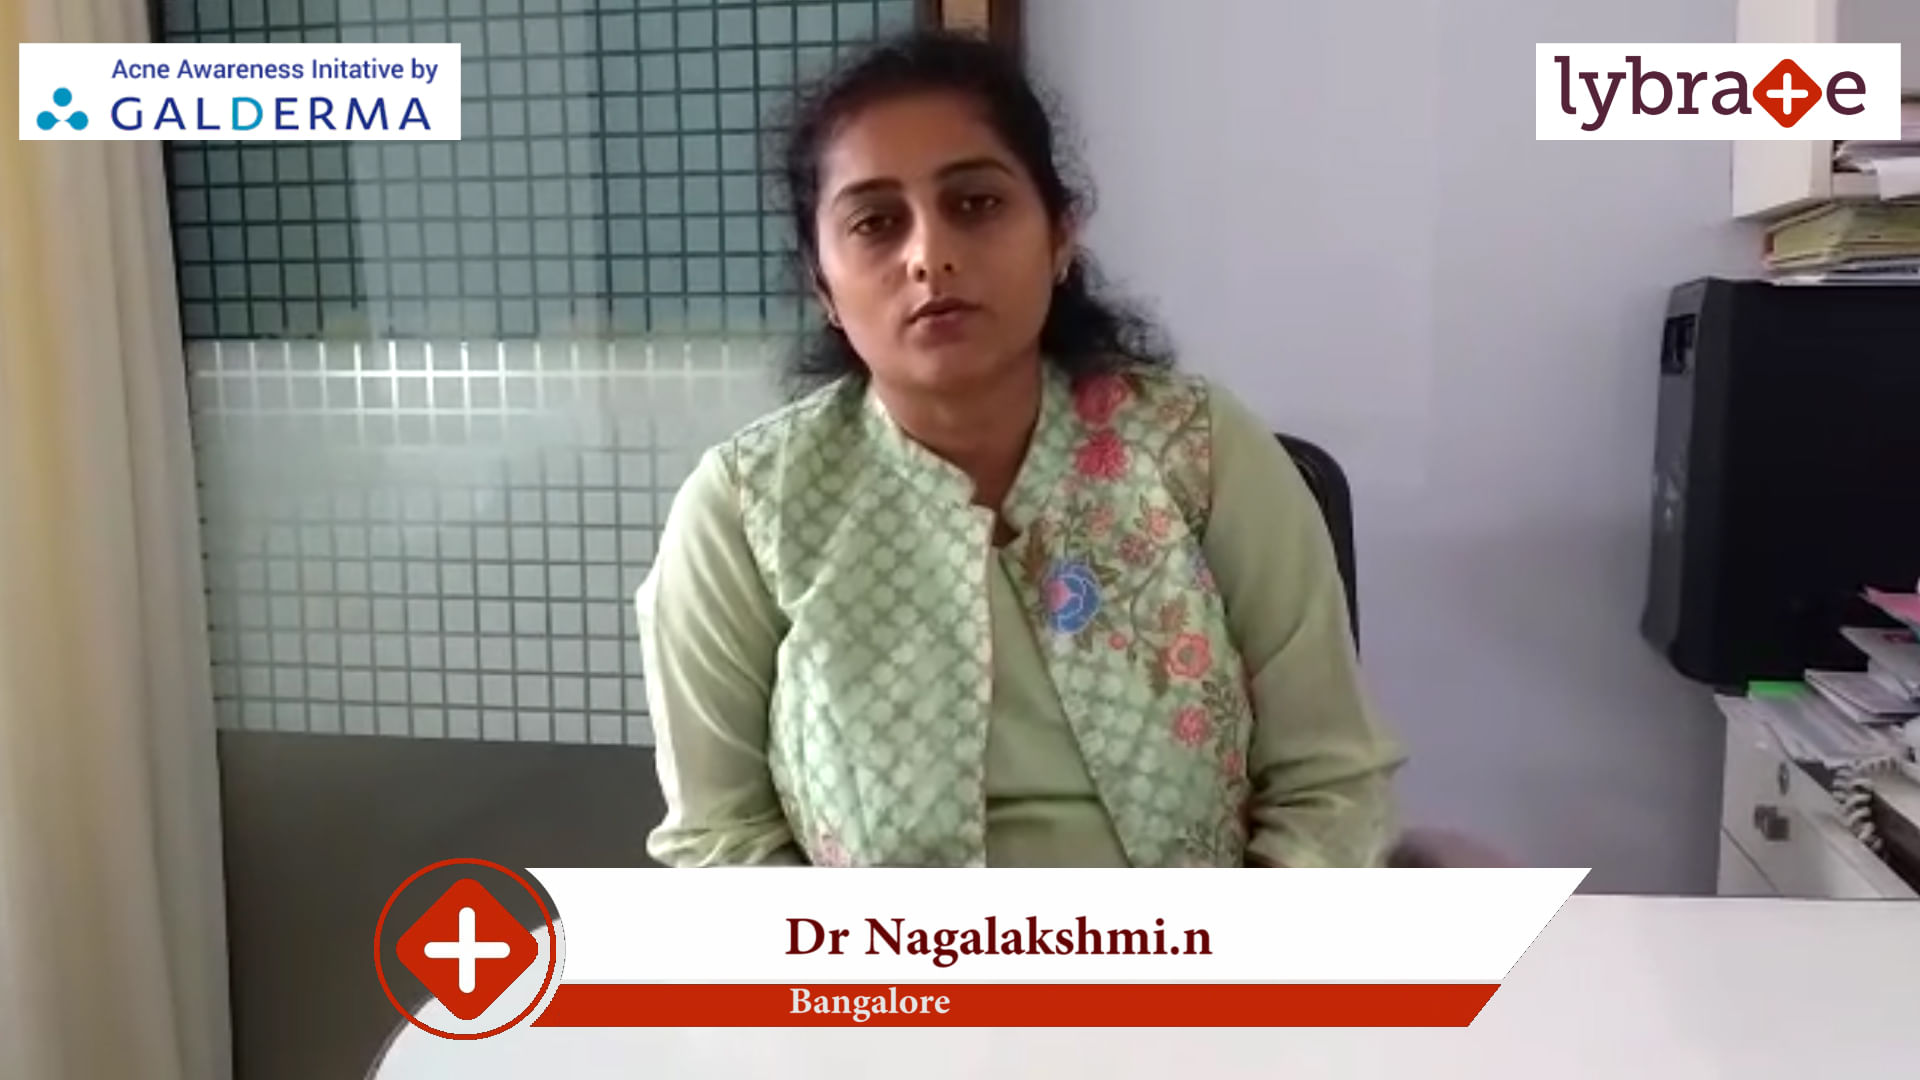 Lybrate | Dr. Nagalakshmi.n. speaks on IMPORTANCE OF TREATING ACNE EARLY